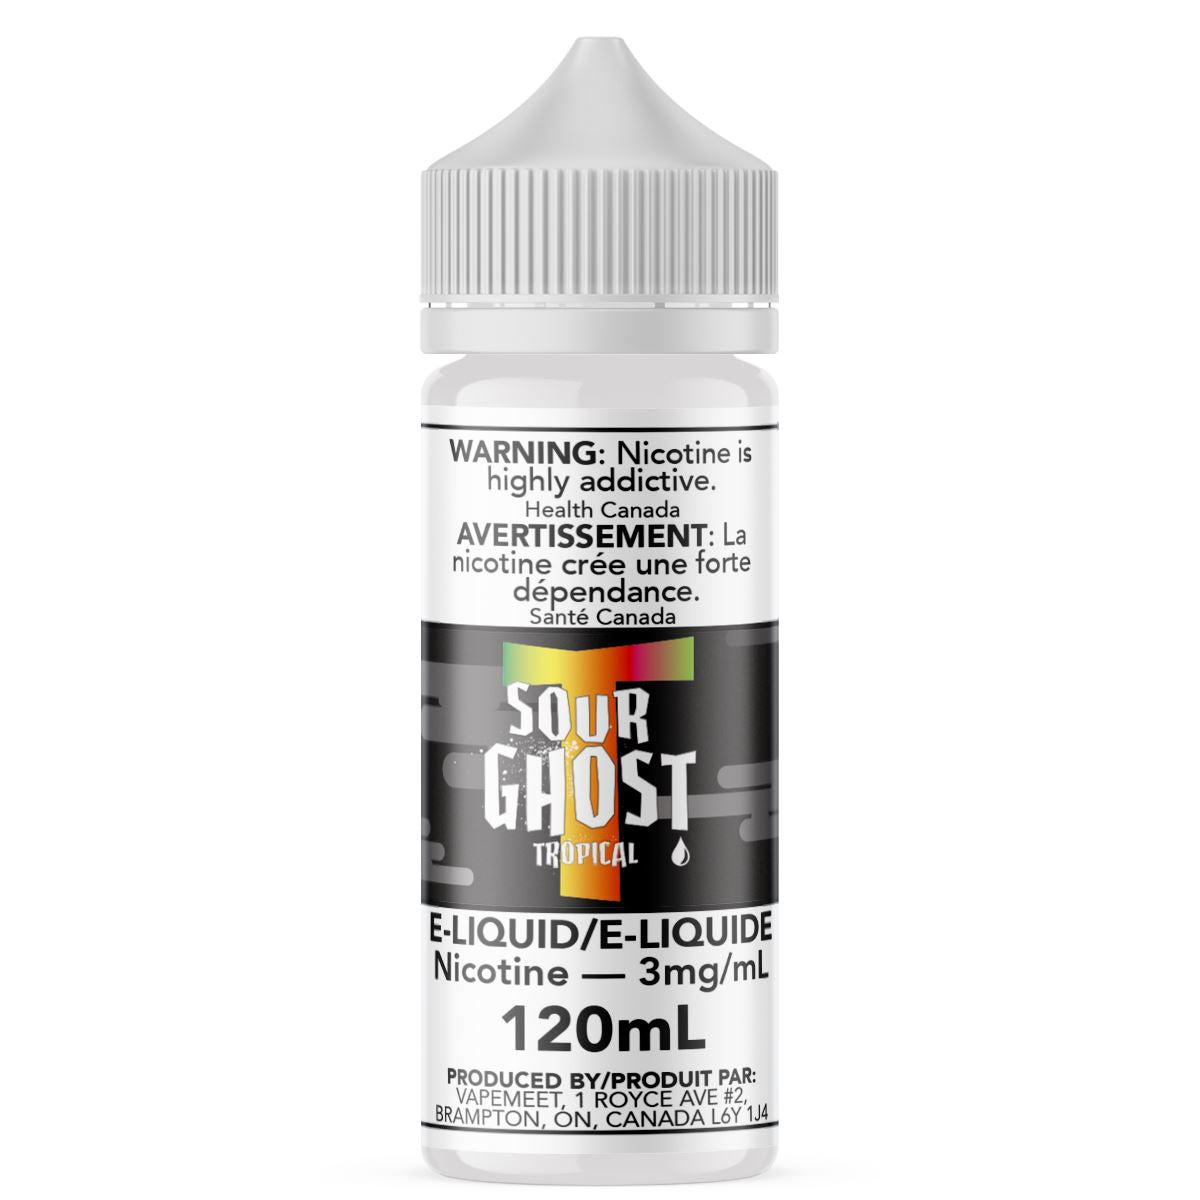 Ghosted - Sour Ghost Tropical E-Liquid Ghosted 120mL 0 mg/mL 